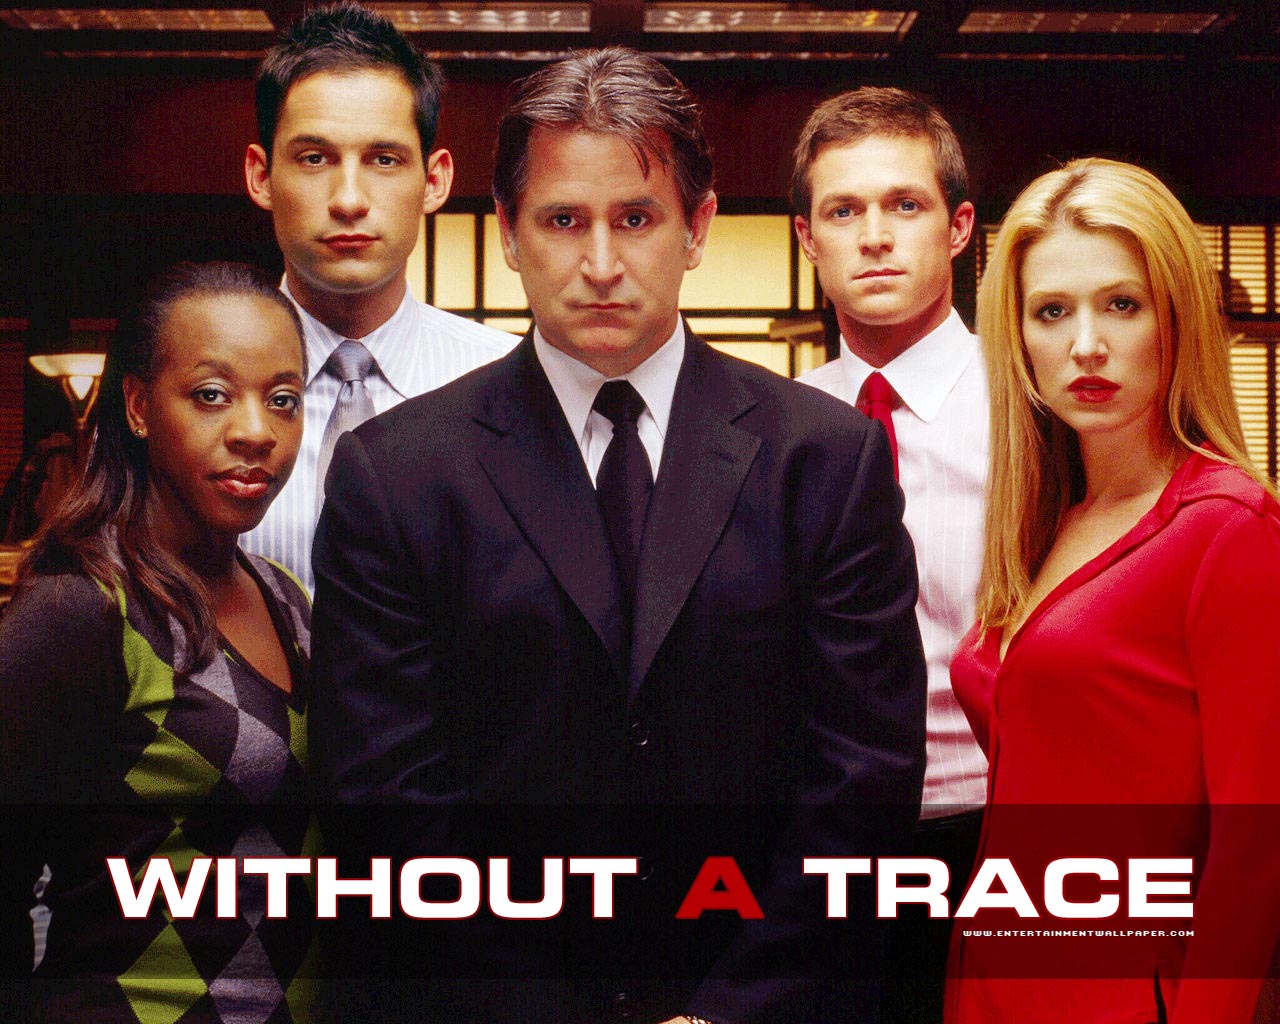 Image Without a trace wallpaper 1280x1024 2.jpg Wiki Wikia